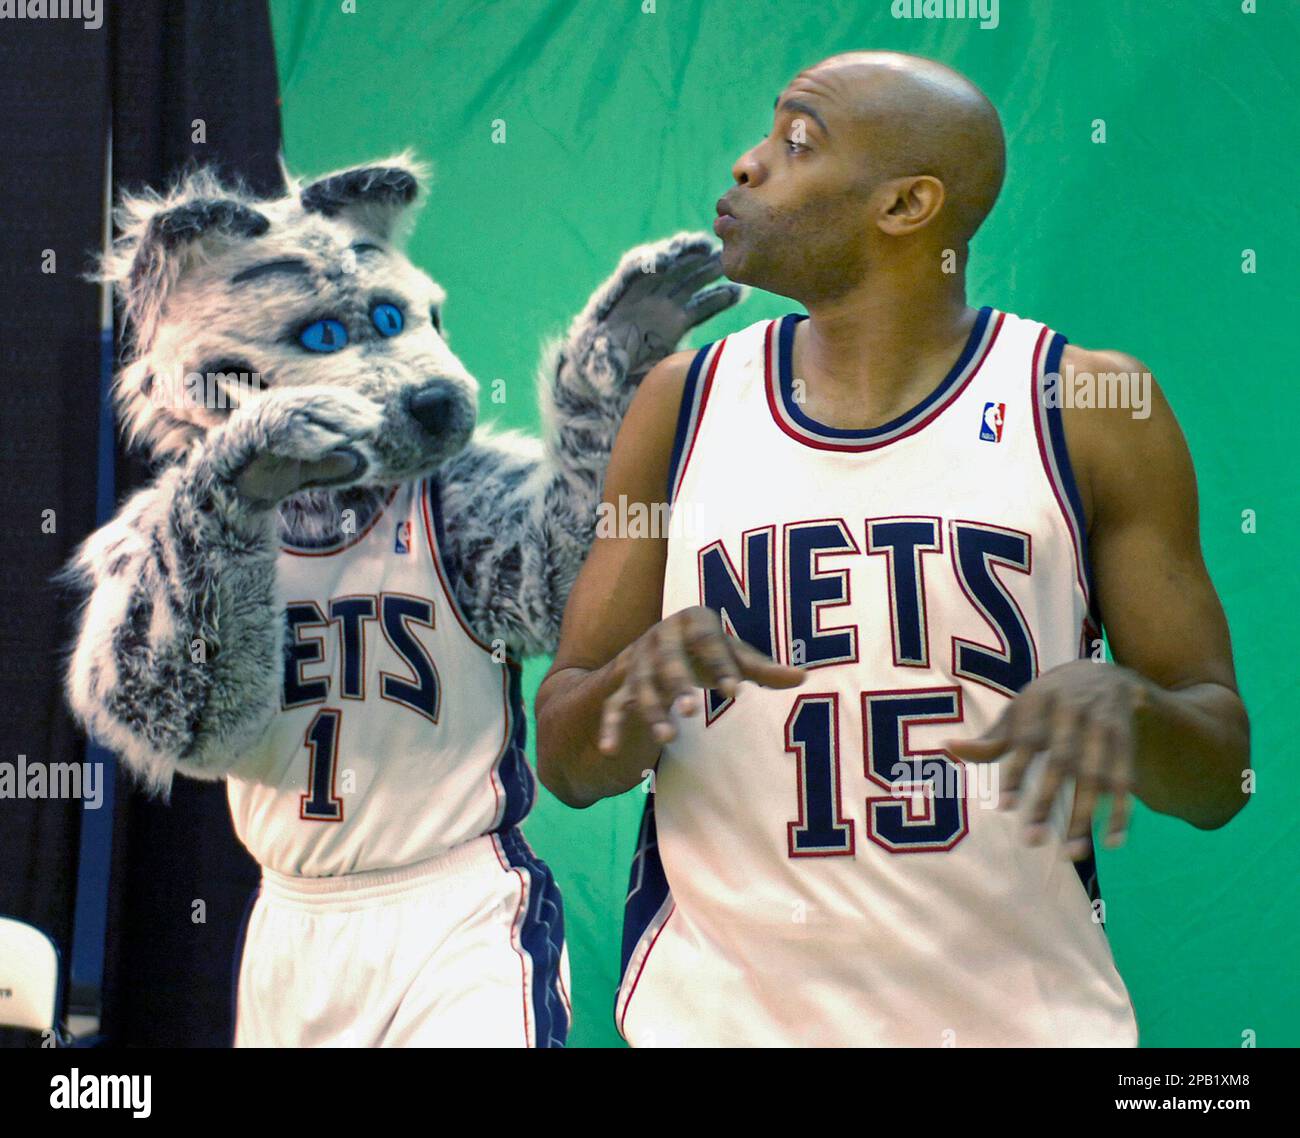 Singer Ciara is greeted by Sly, the Nets mascot, as she attended